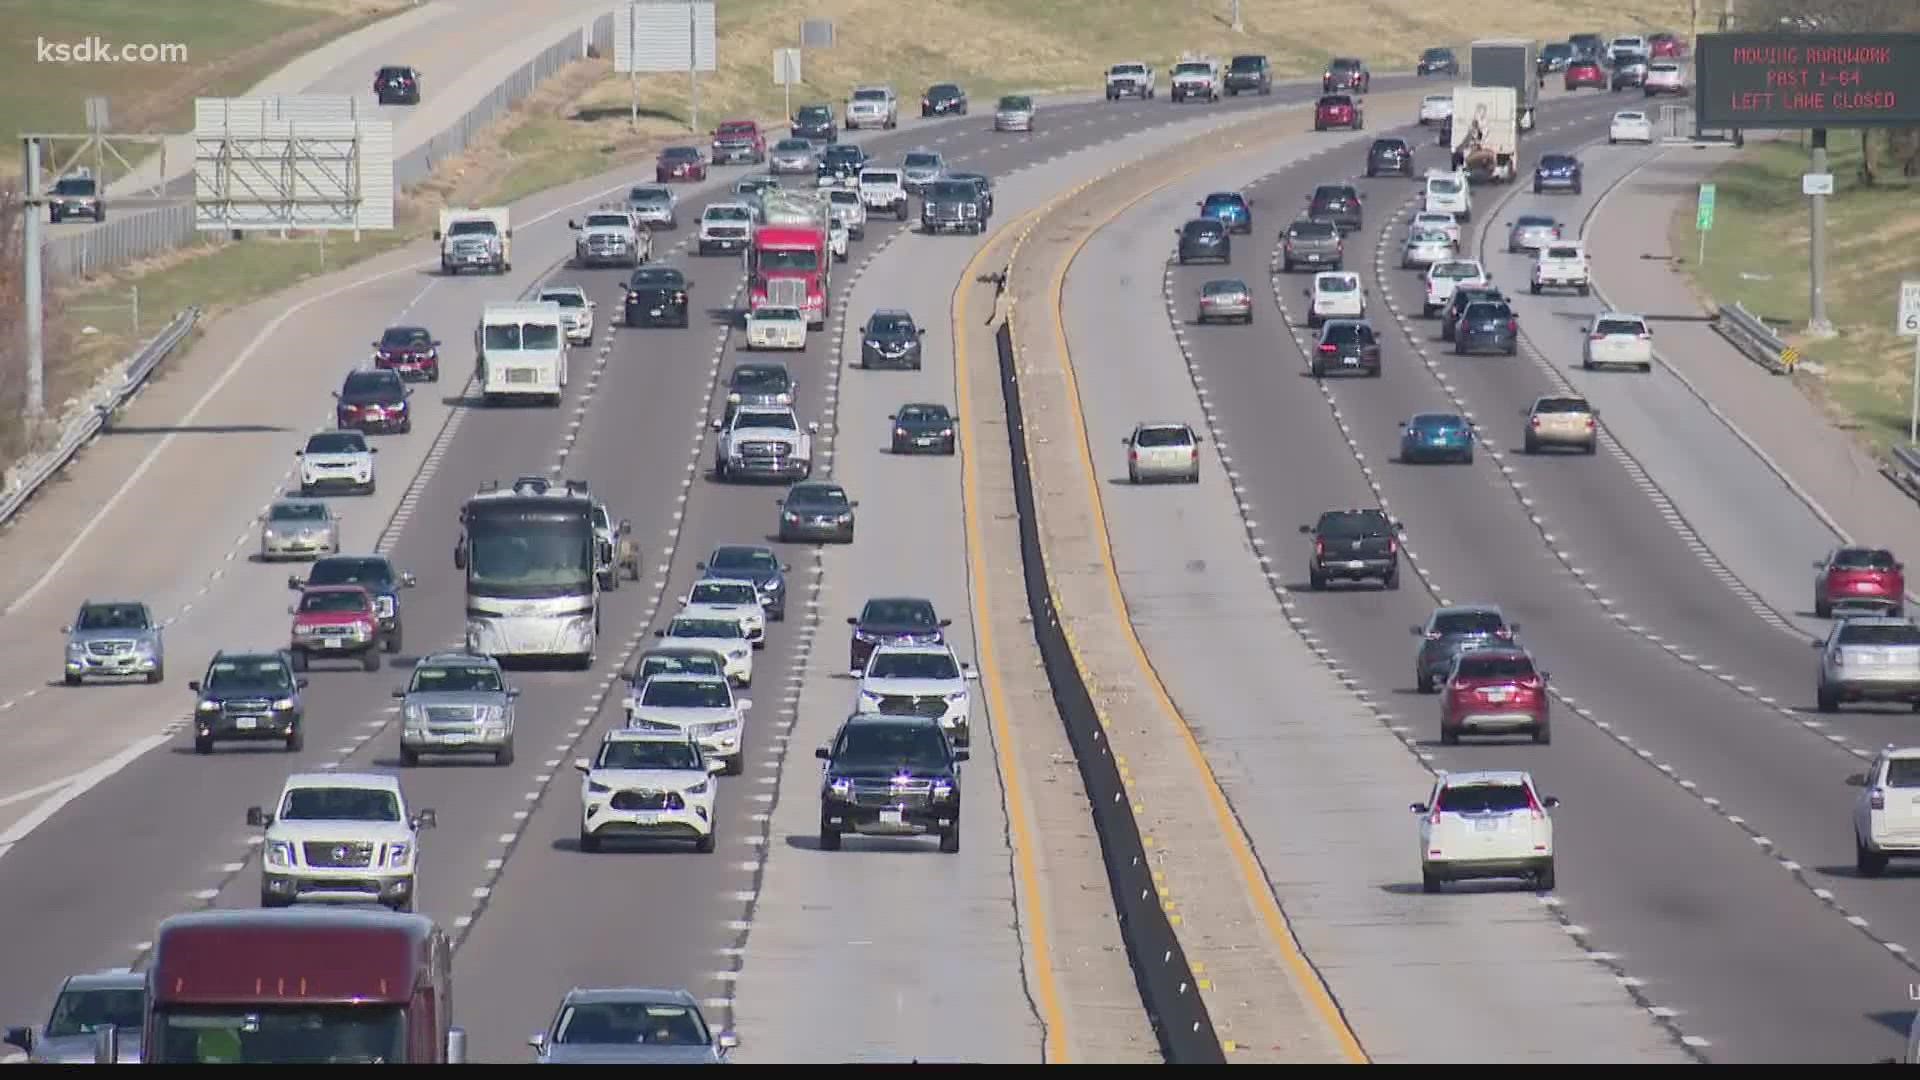 About 53 million people are expected to travel this week for Thanksgiving. AAA says leaving before noon is great option to beat traffic.